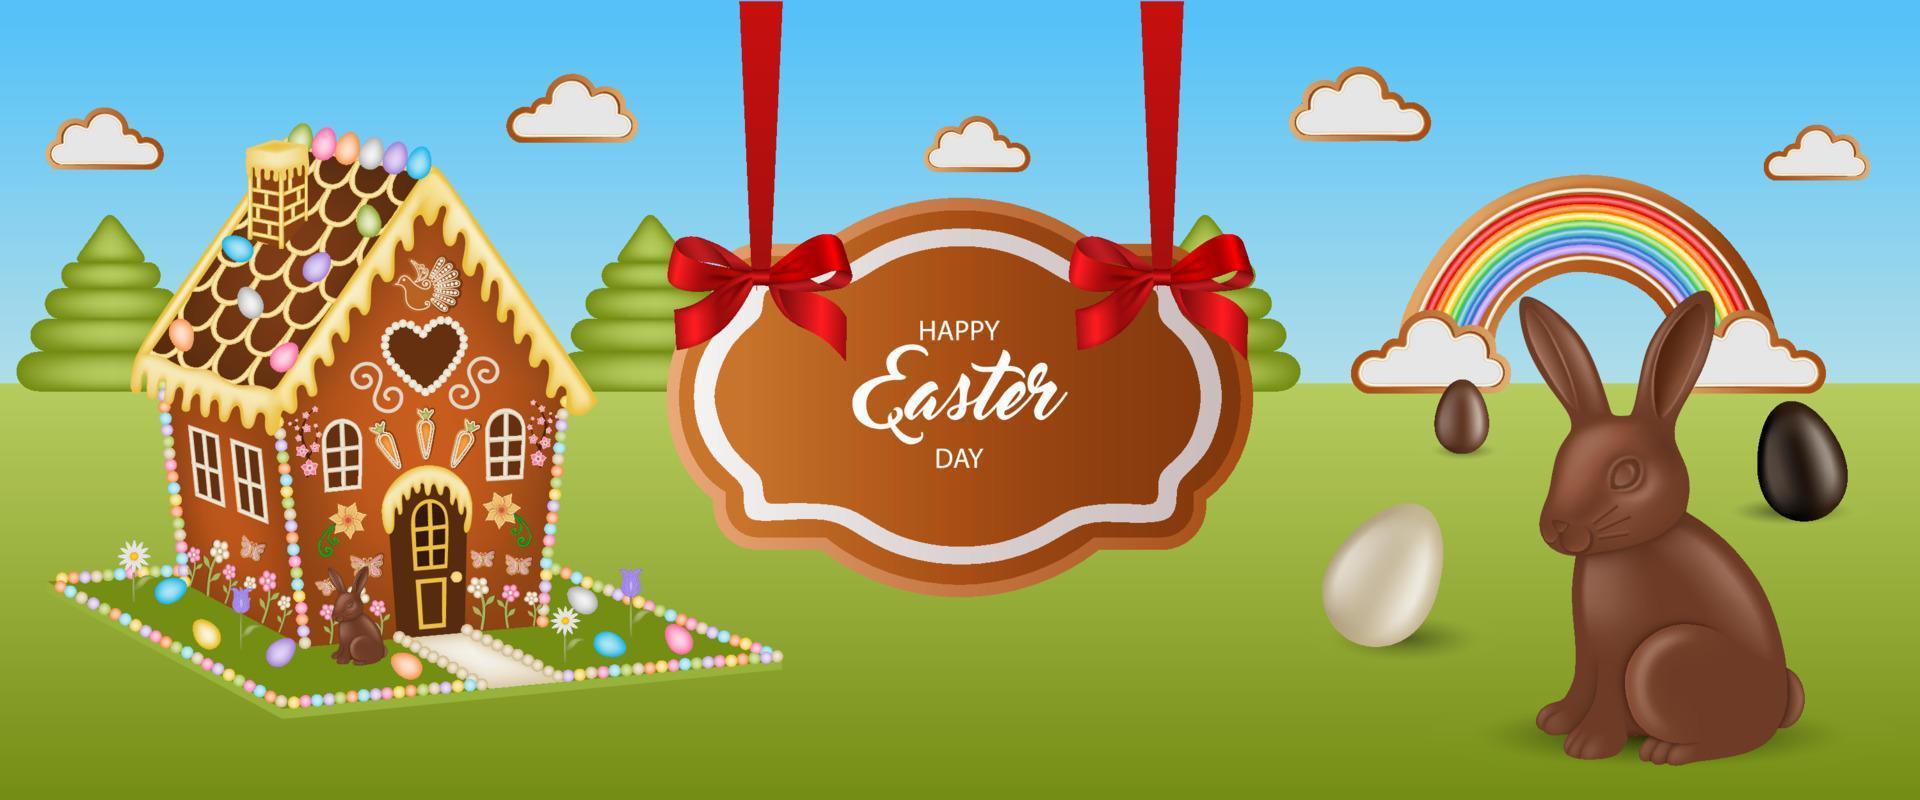 easter banner with gingerbread house, chocolate eggs and rabbit vector